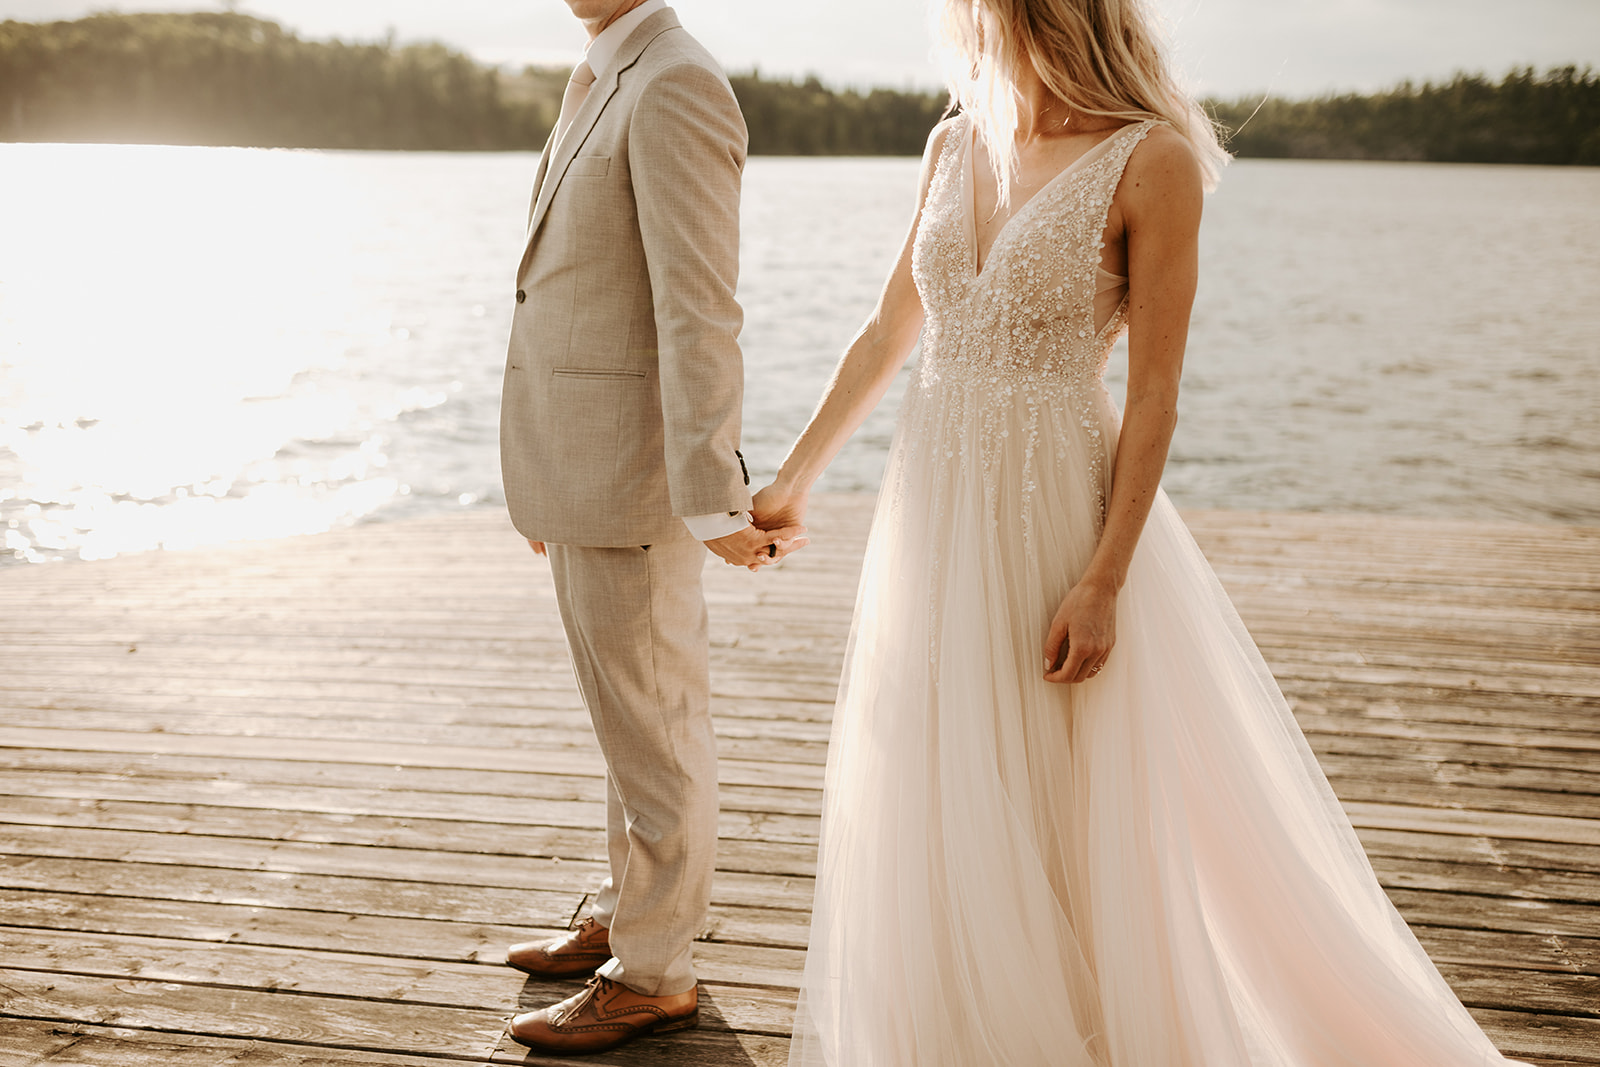 Bride and groom embracing at a dock at sunset during their wedding in Lake of the Woods, Kenora, Ontario,